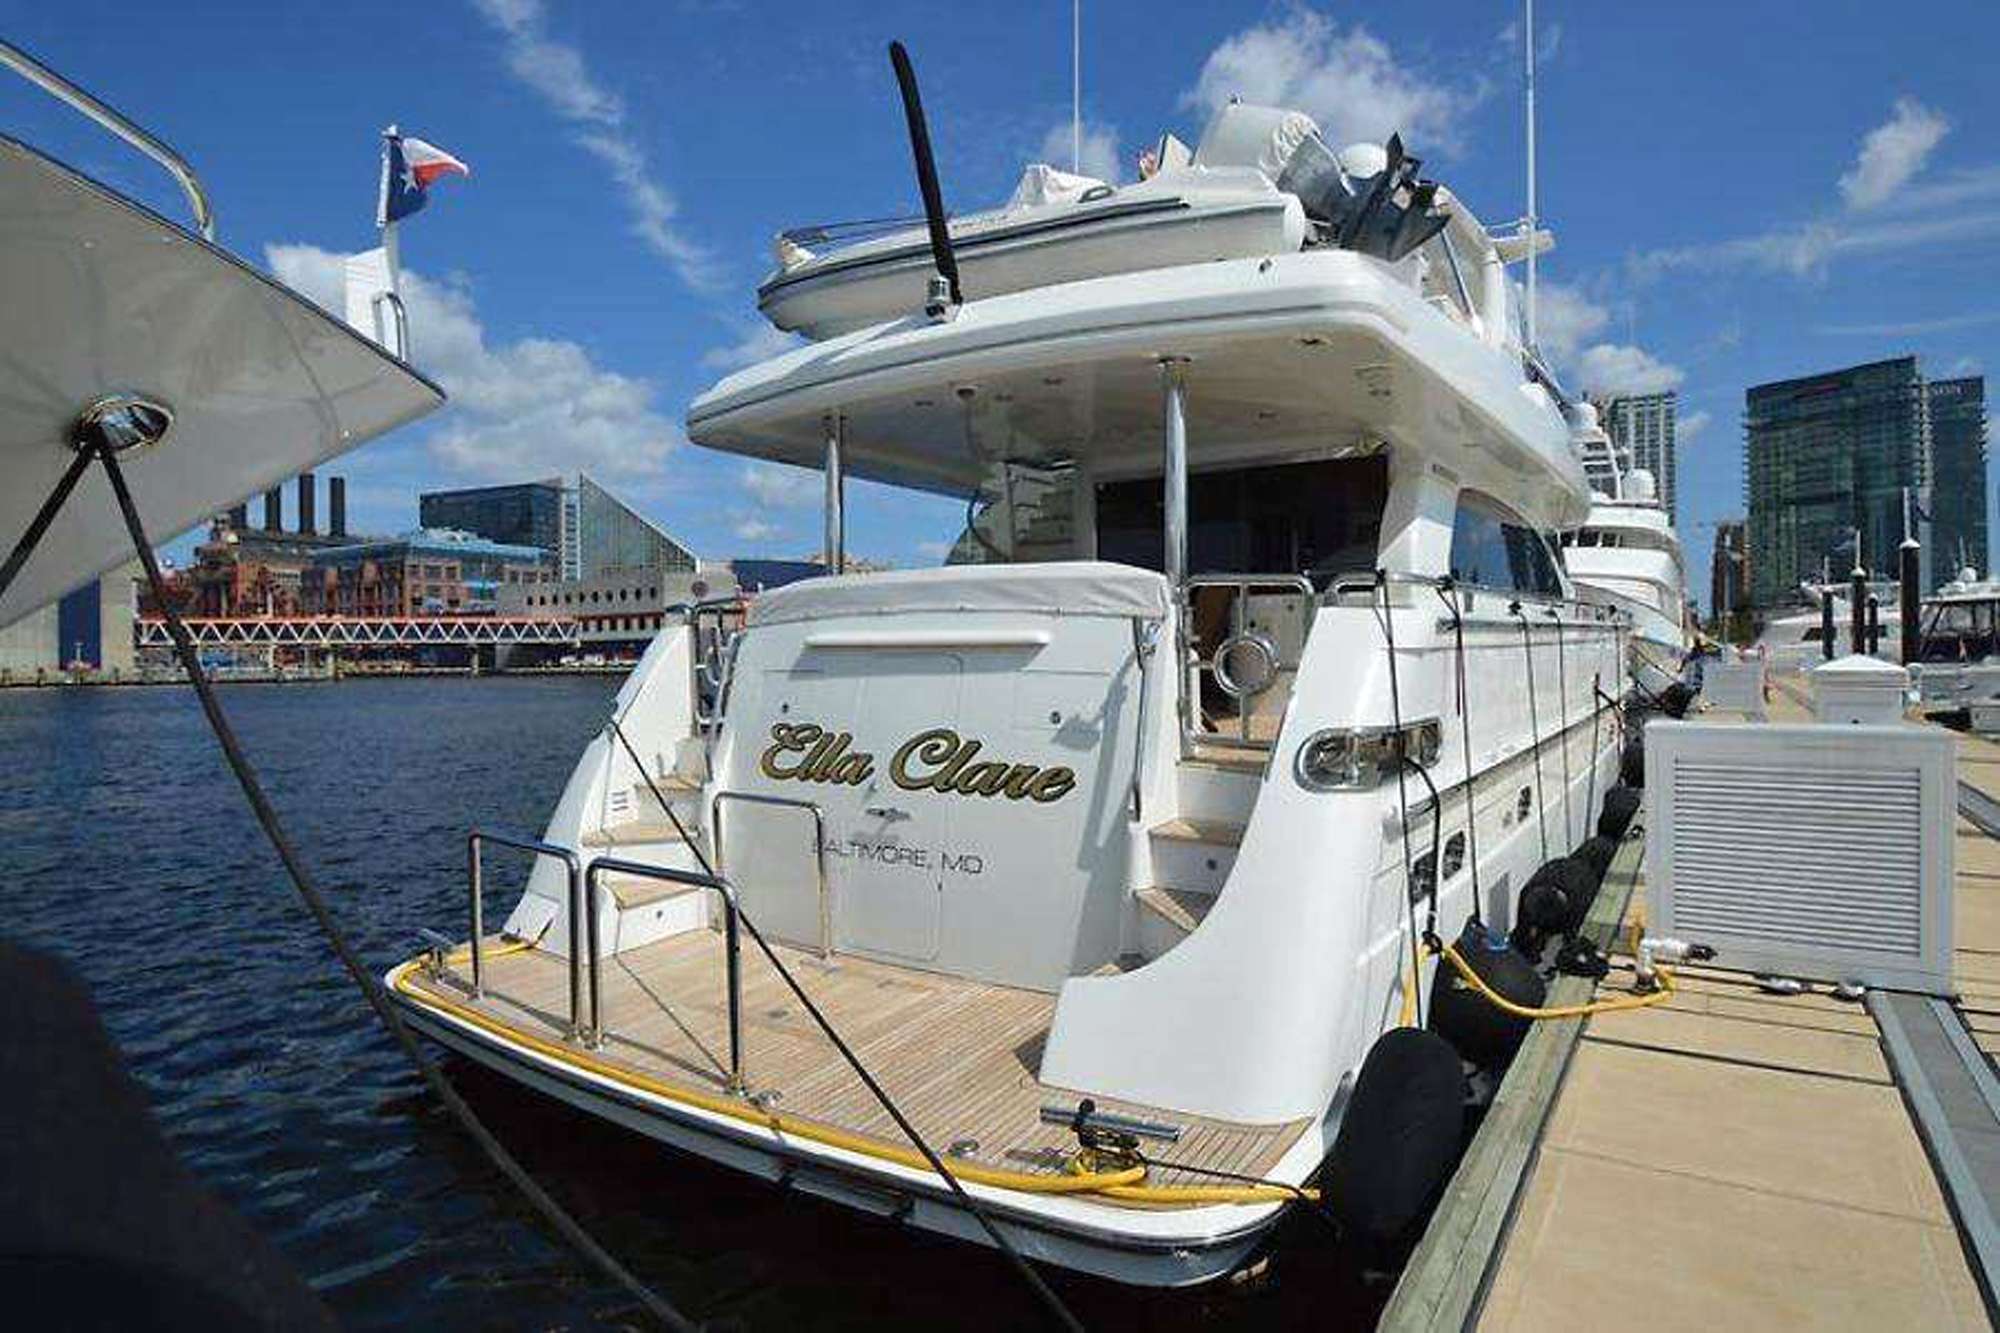 Stern of the Yacht at the Marina